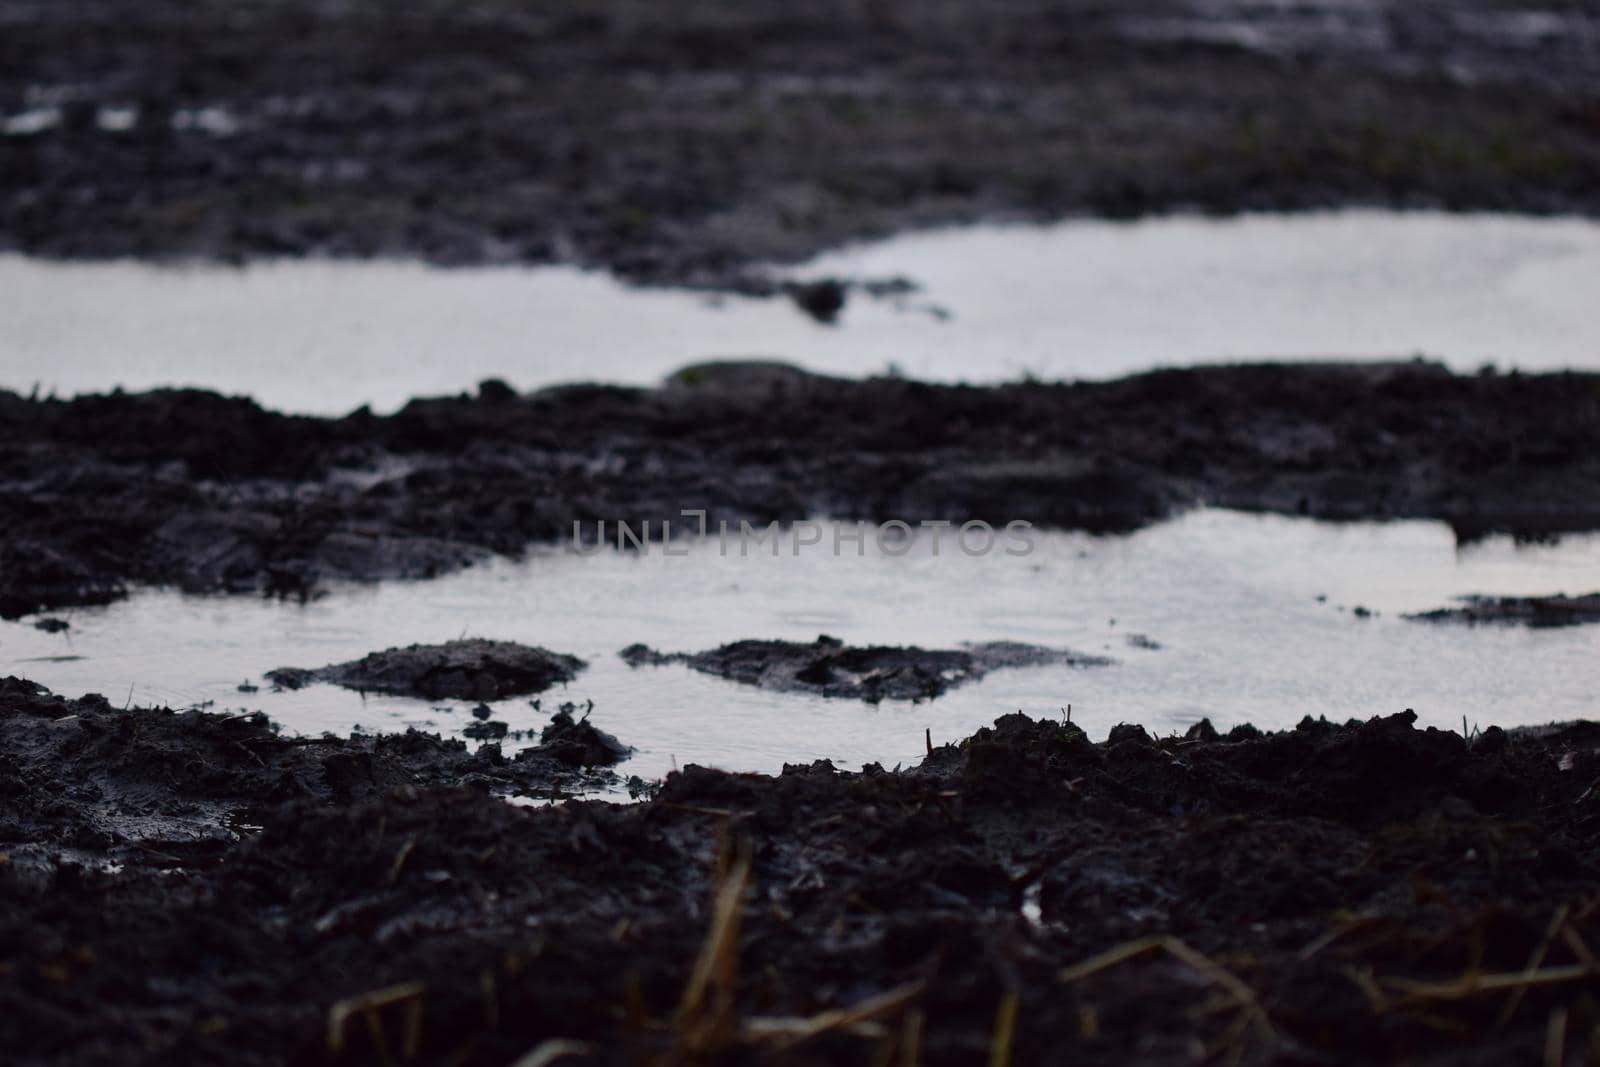 Big puddle on a paddock on a dreary day as a close up